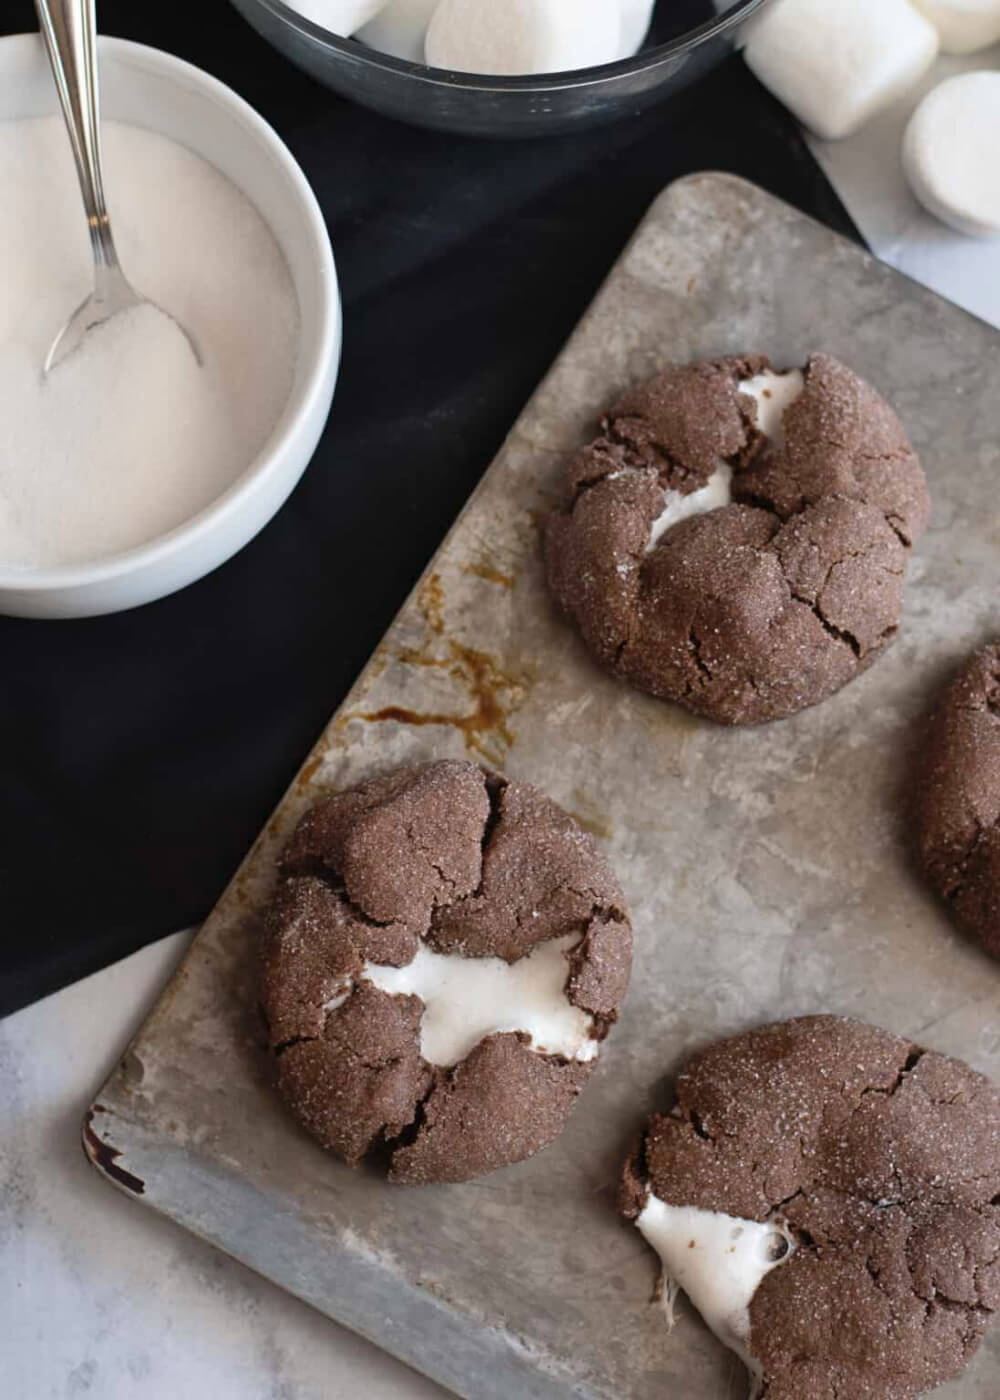 Chocolate cookies with marshmallow inside